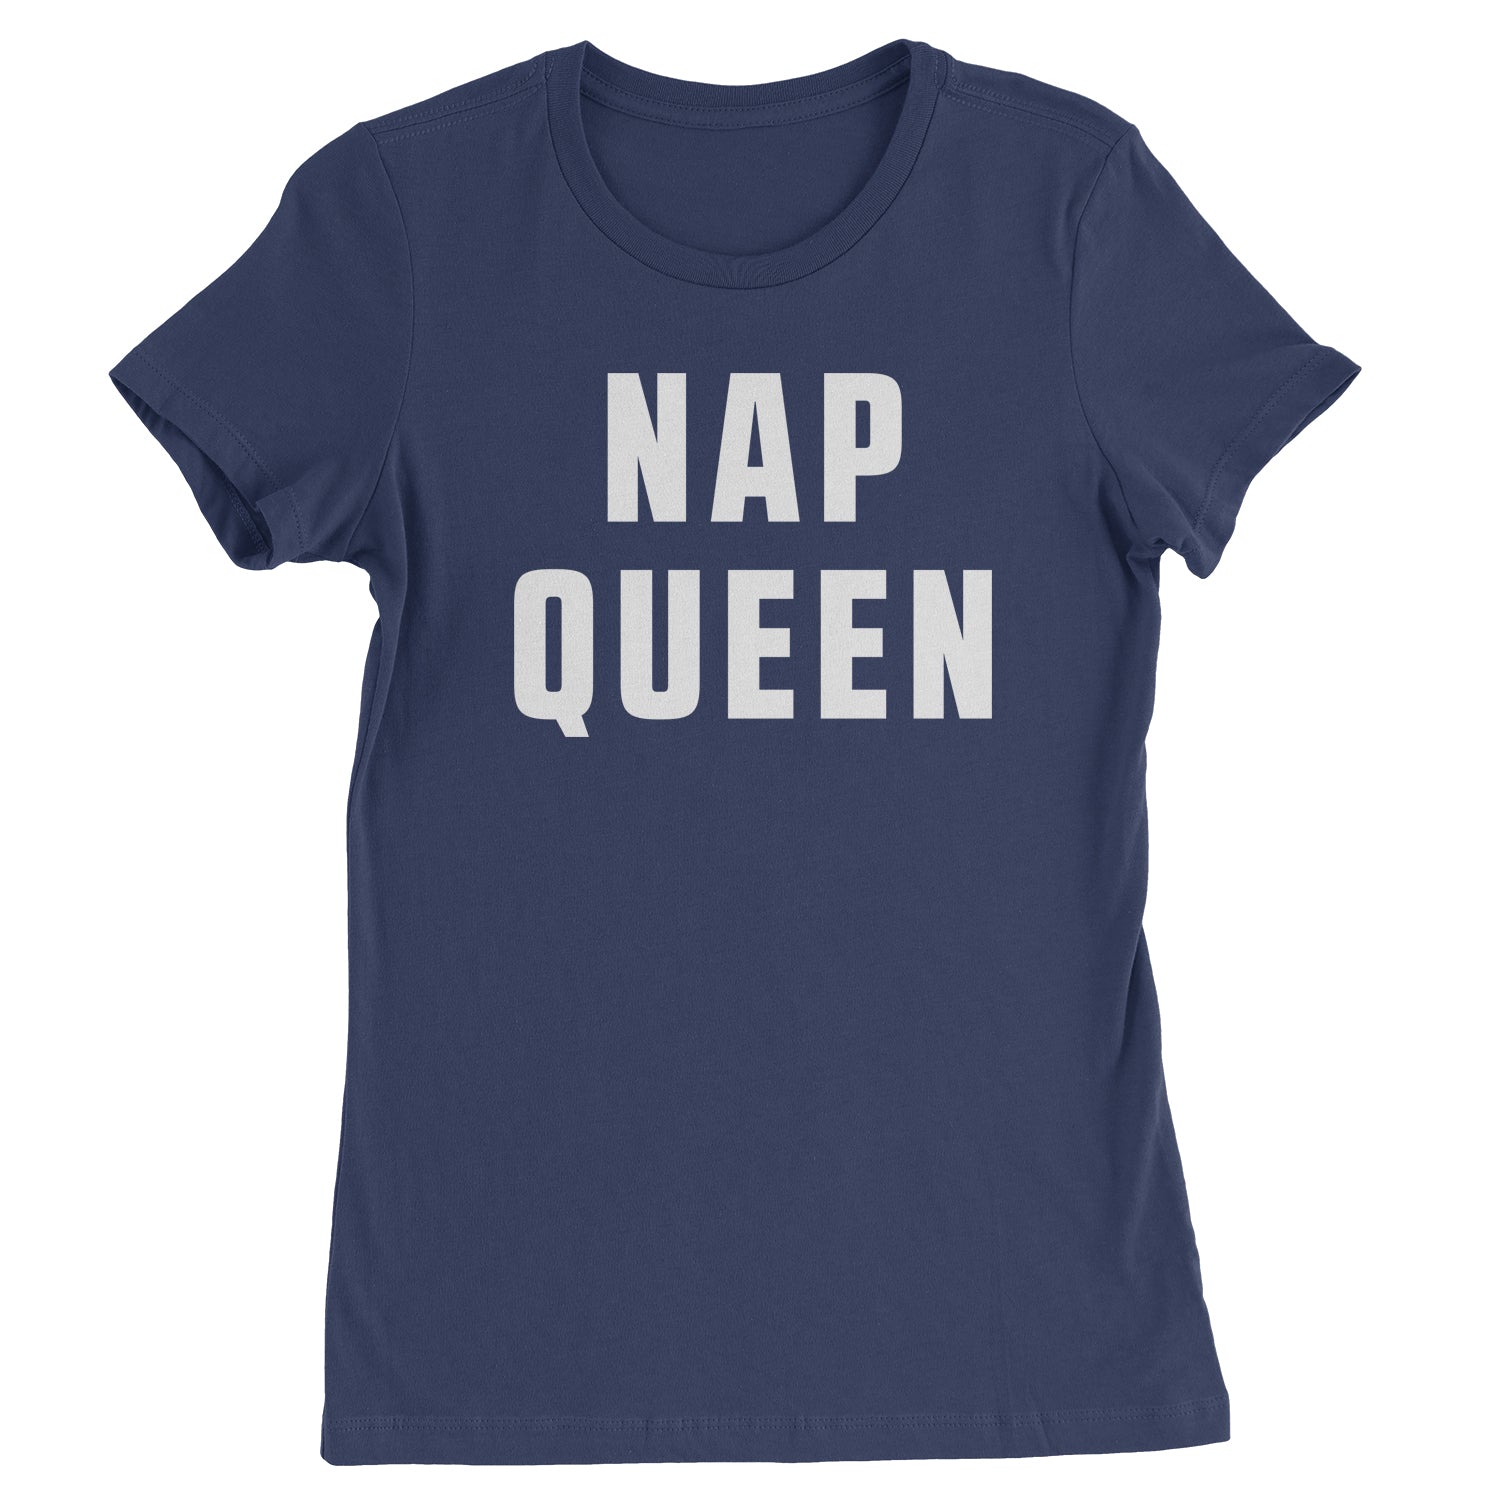 Nap Queen (White Print) Comfy Top For Lazy Days Womens T-shirt all, day, function, lazy, nap, pajamas, queen, siesta, sleep, tired, to, too by Expression Tees